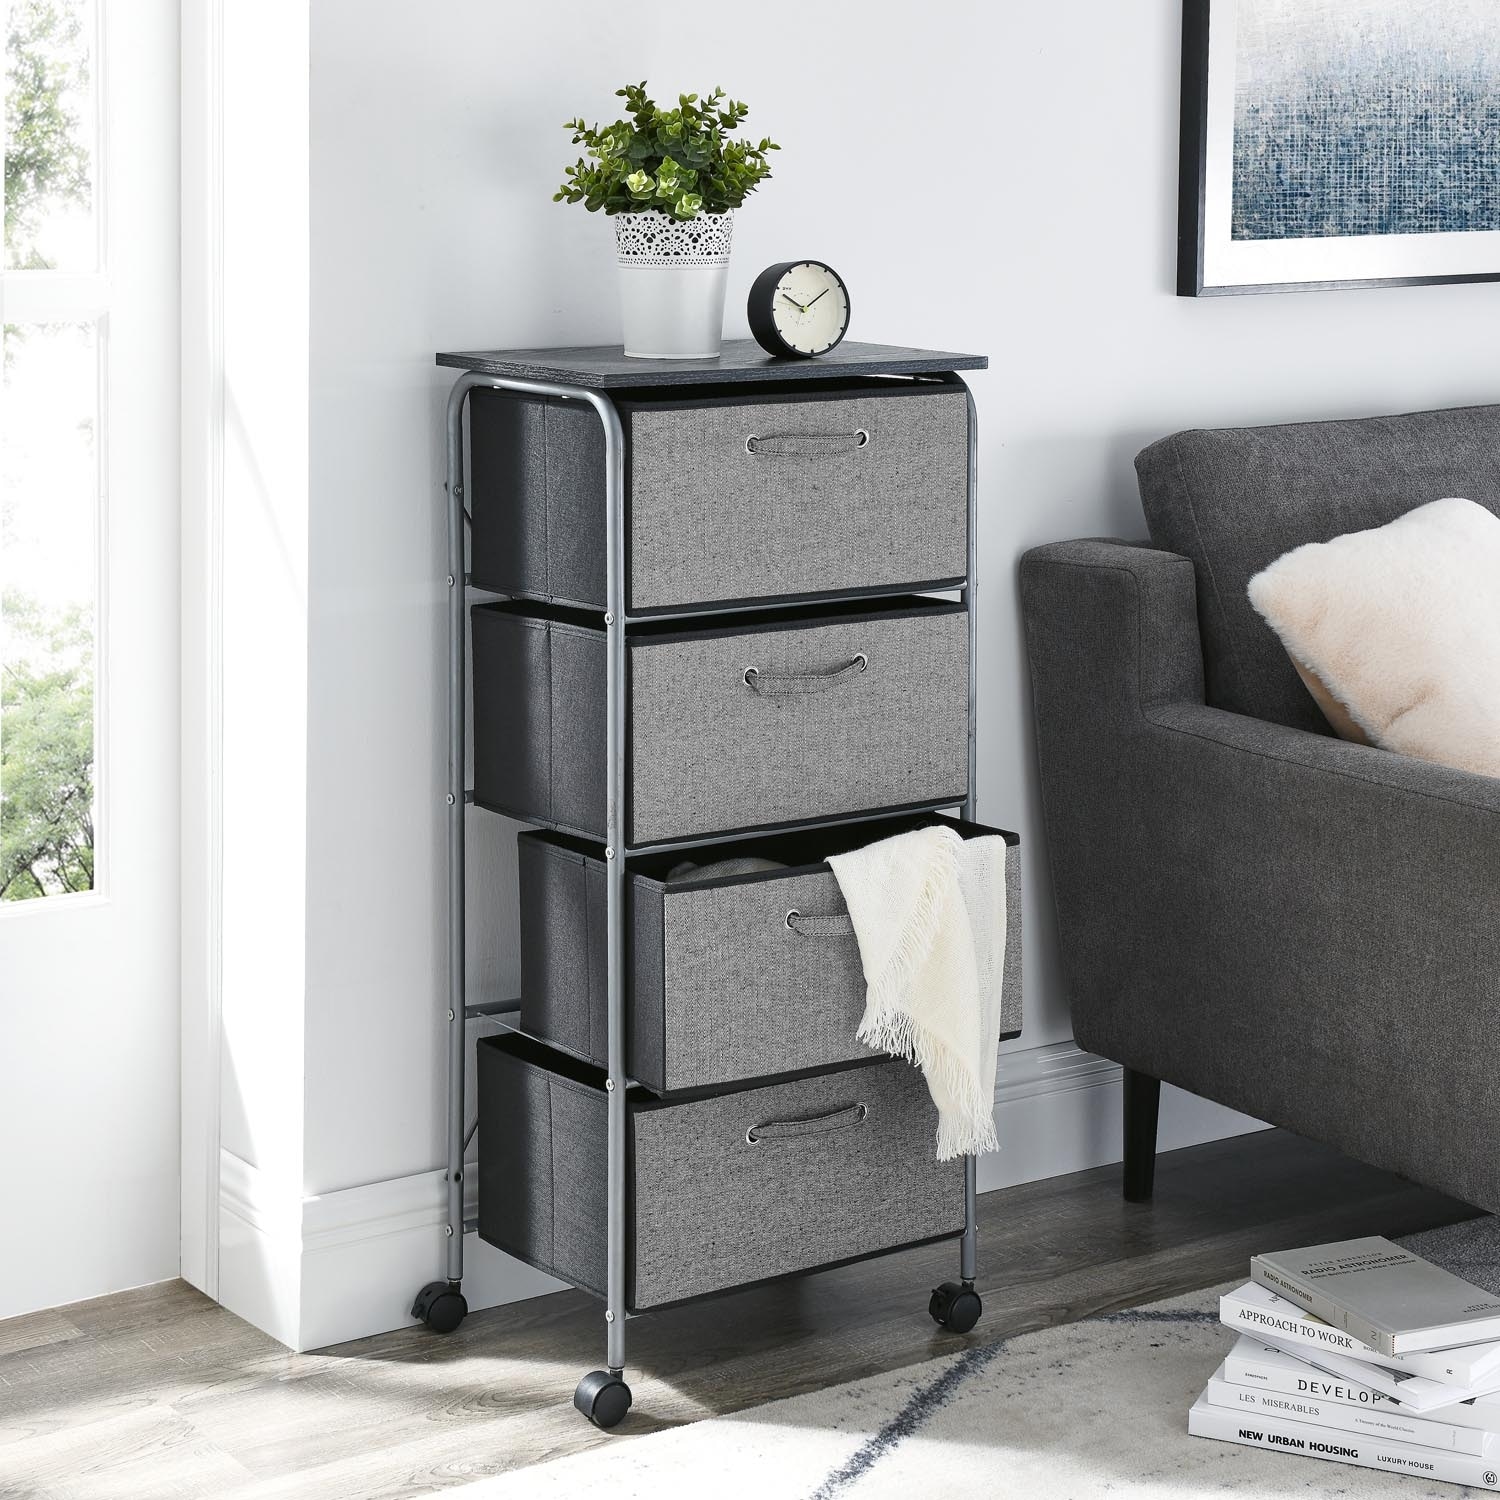 mDesign Vertical Dresser Storage Tower with 4 Drawers Charcoal Gray/Black 